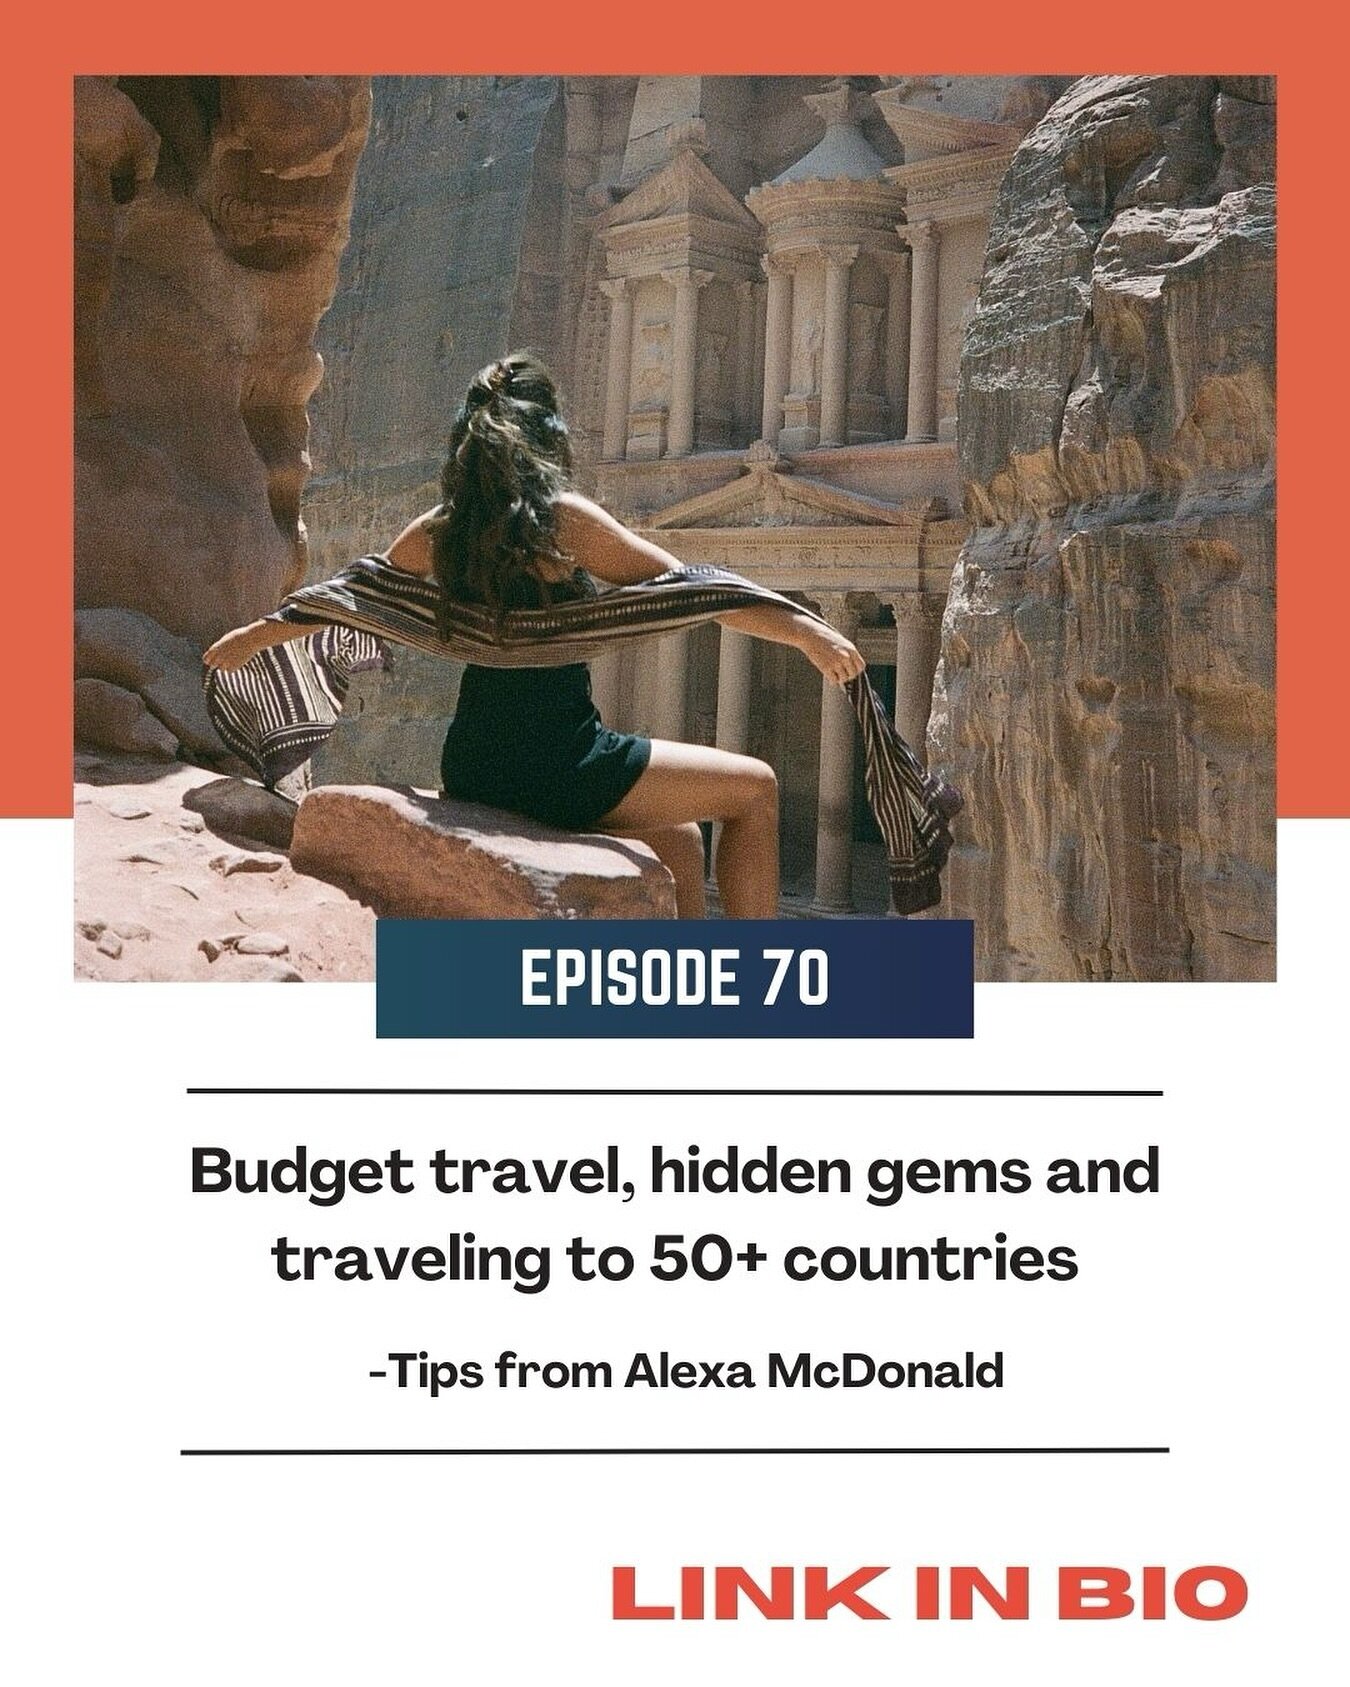 Alexa McDonald (@alexamcdonald) has been to more than 50 countries and has developed useful and interesting tactics to travel the world for free or on a budget. Alexa is a content creator and open book, she loves to help people navigate the world and